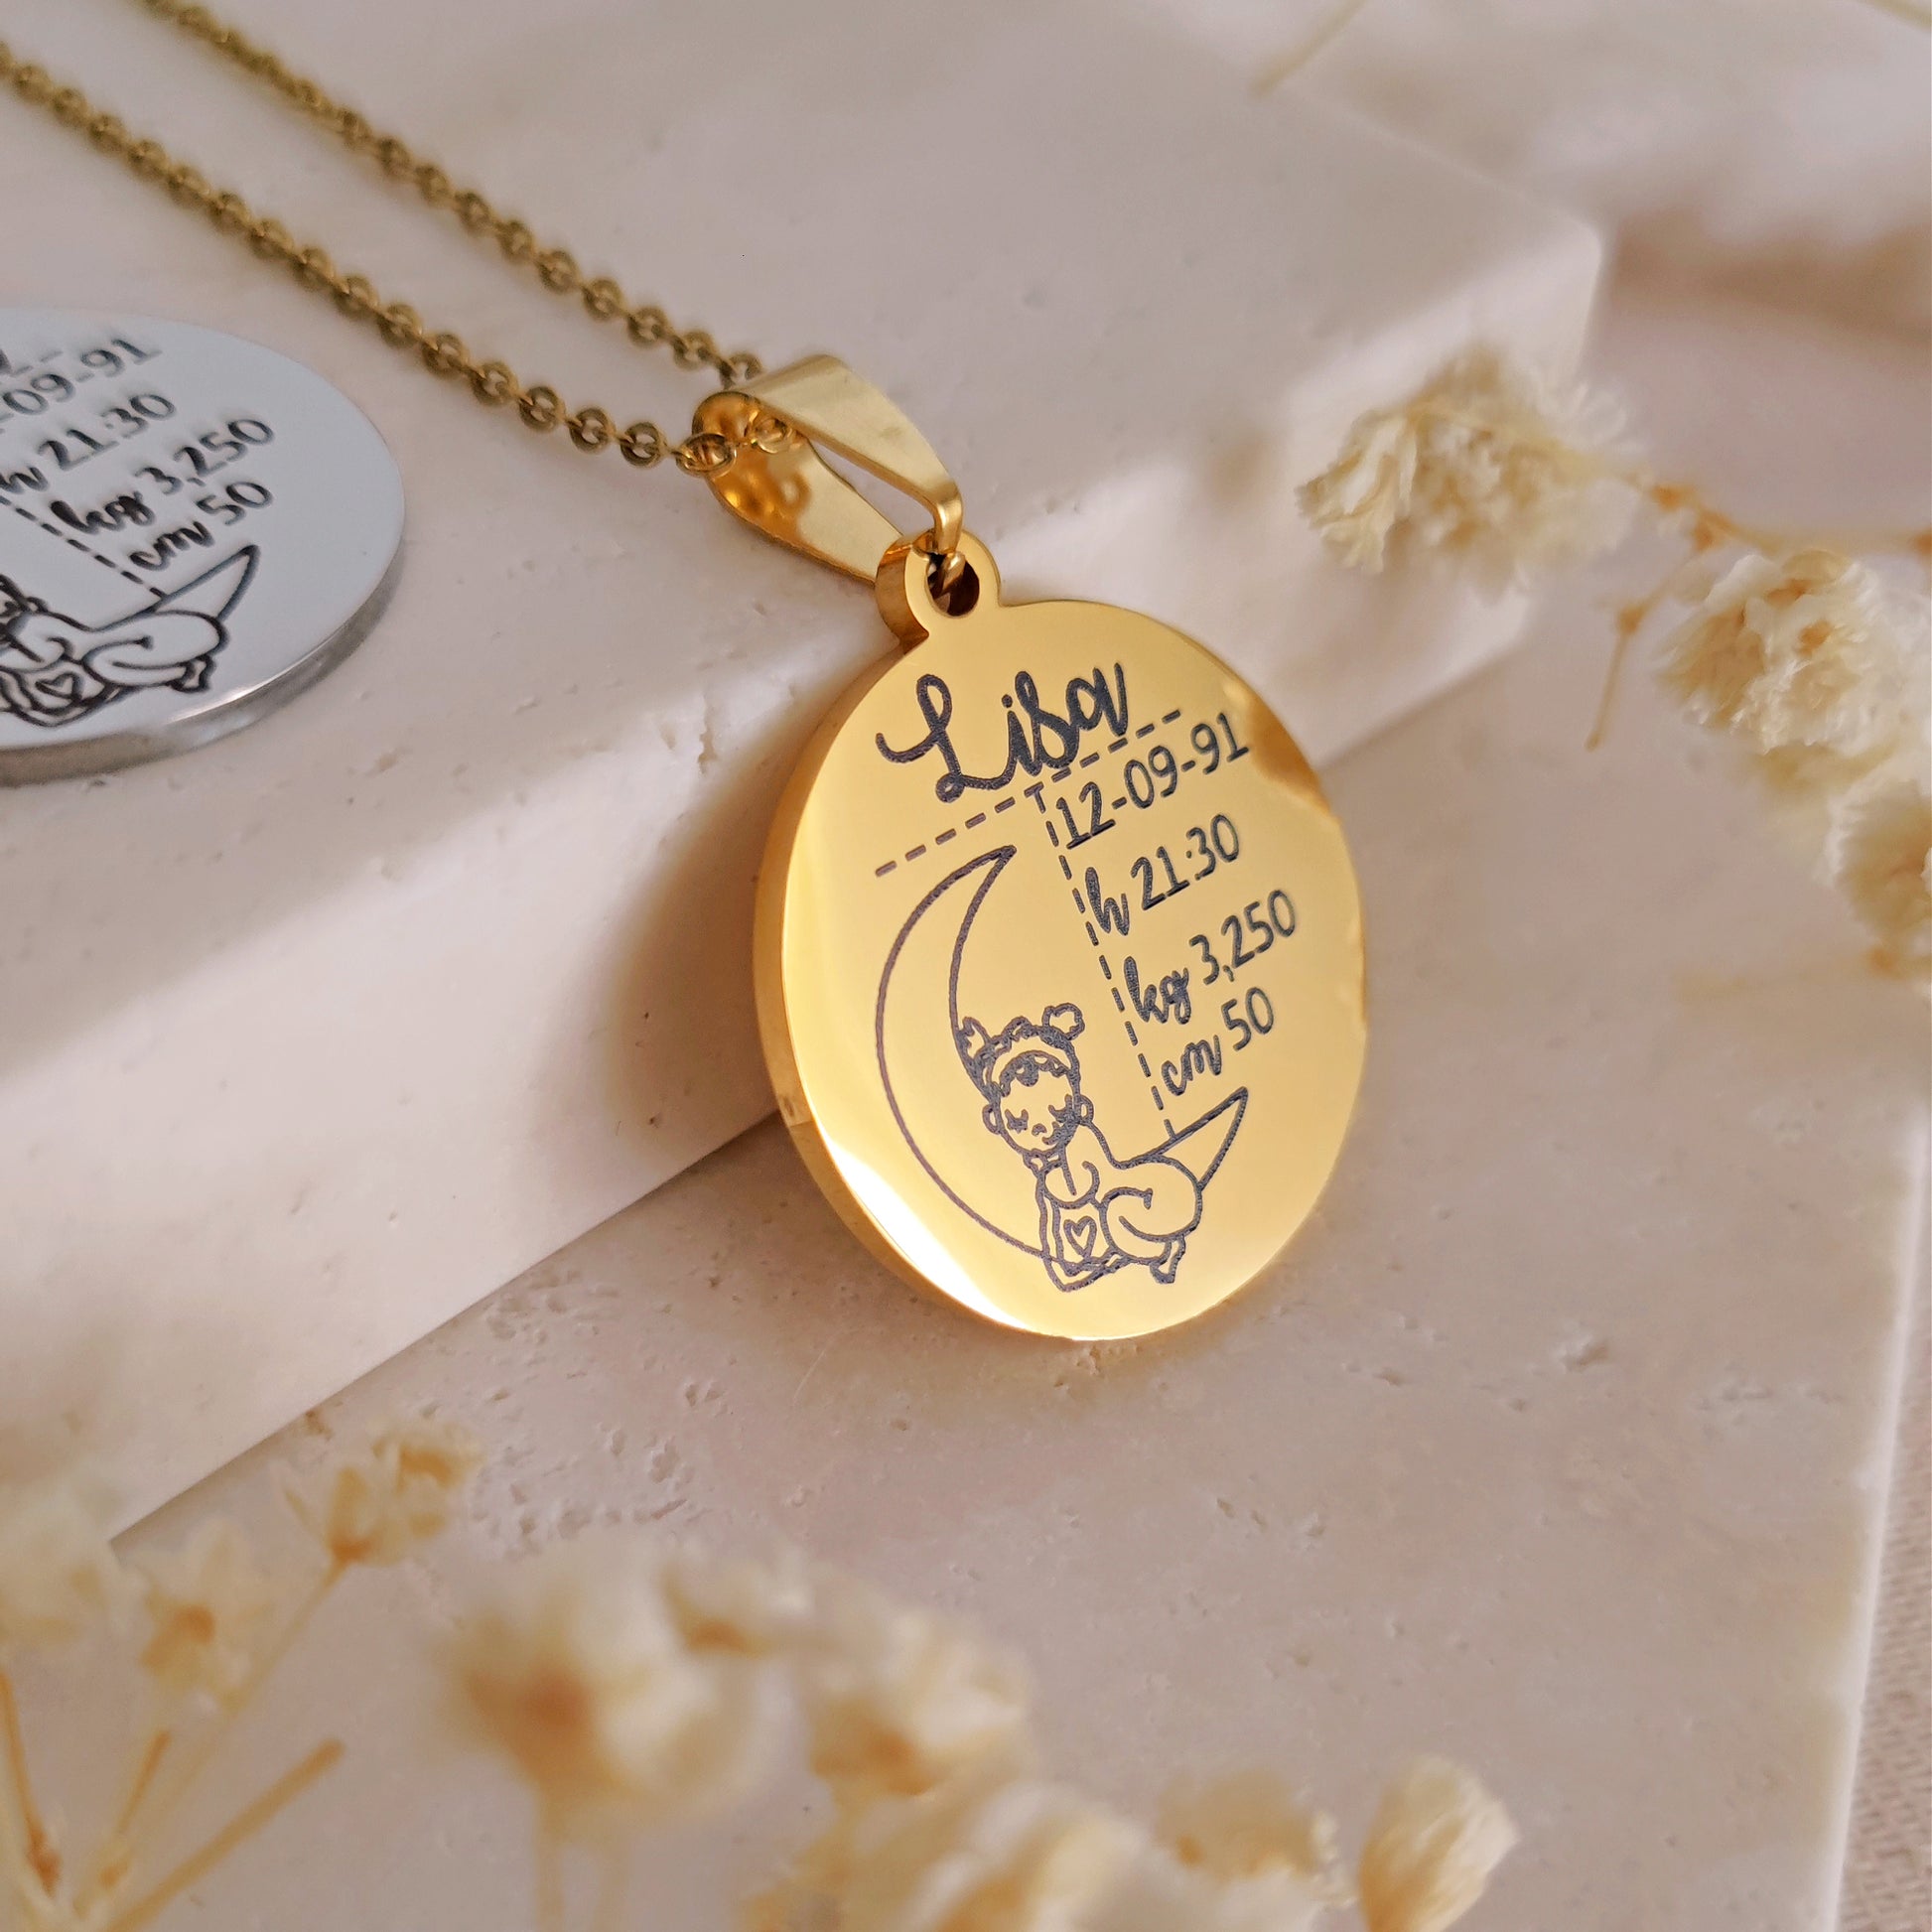 Personalization Jewelry Collection for Jewelry